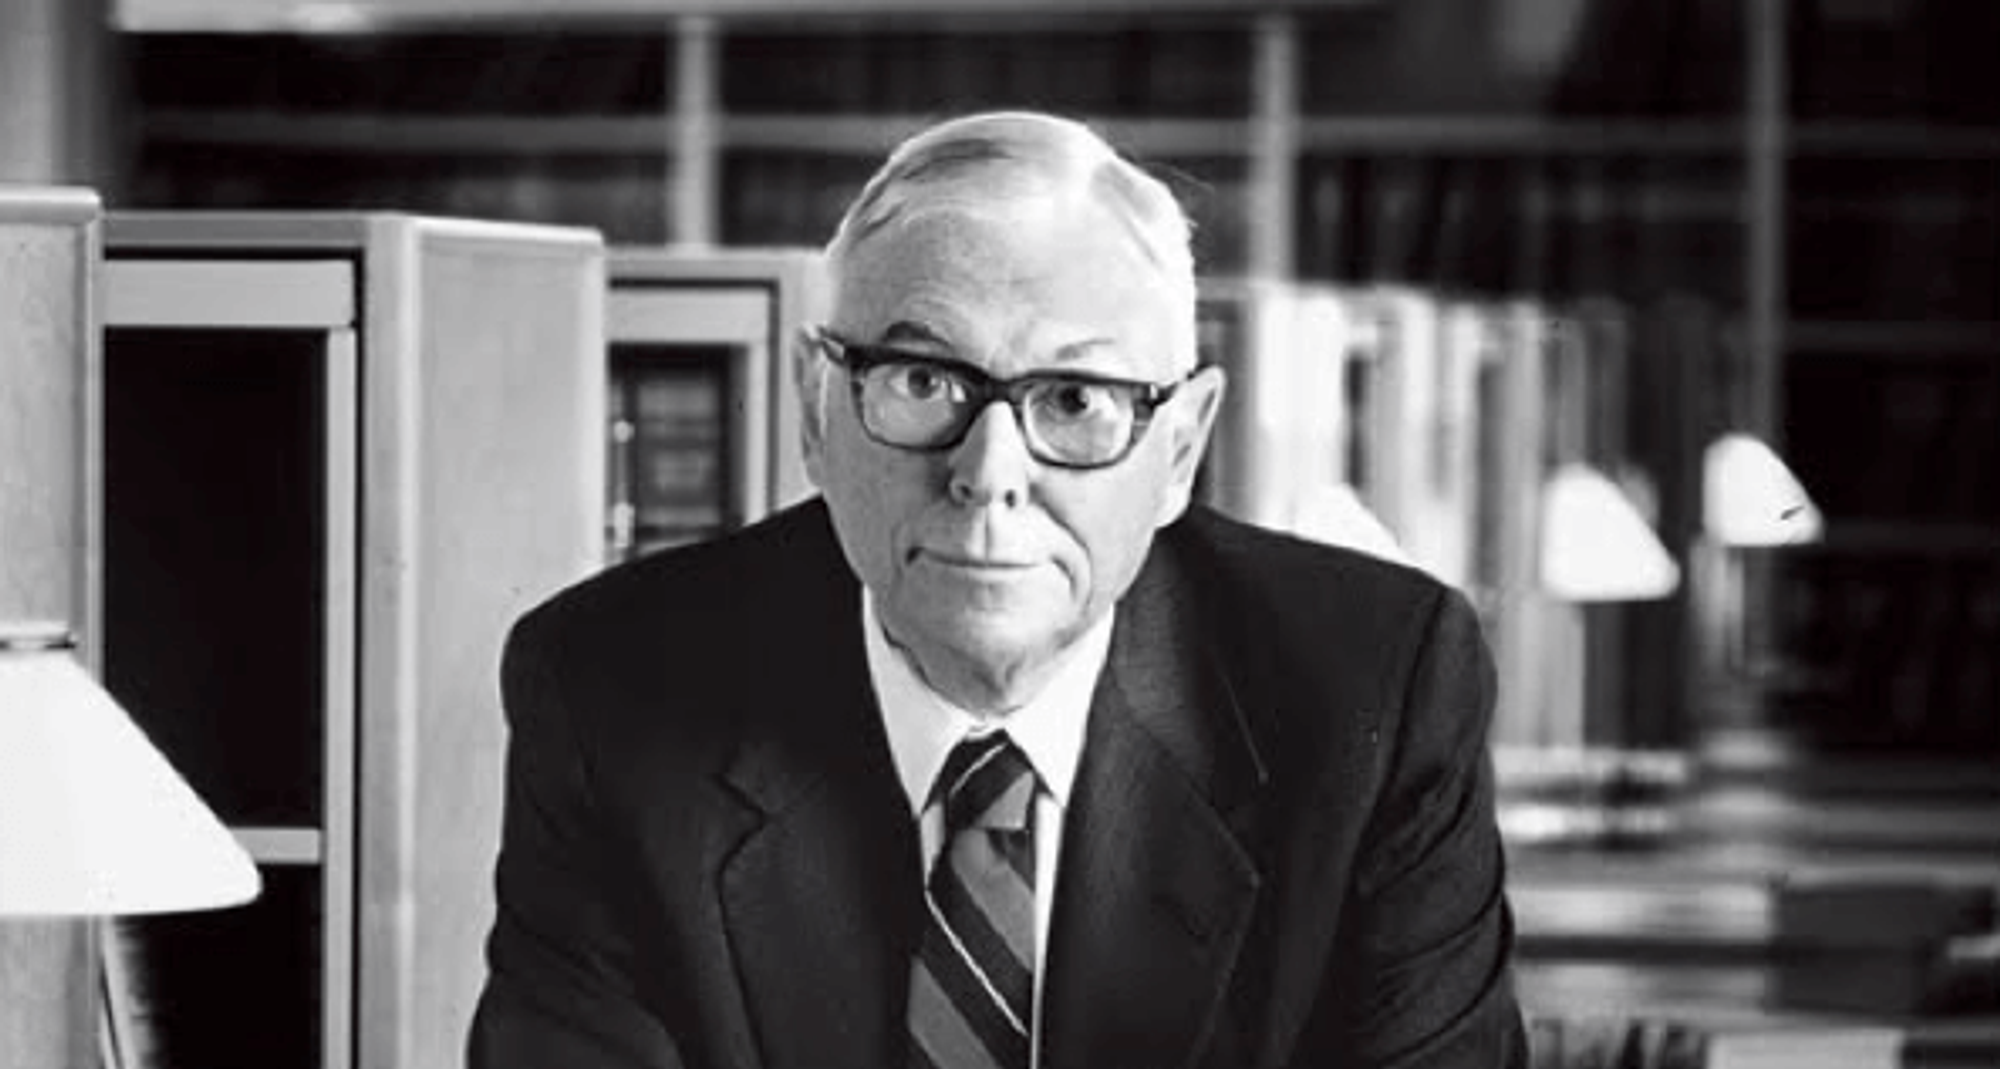 Charlie Munger: The Power Of Not Making Stupid Decisions